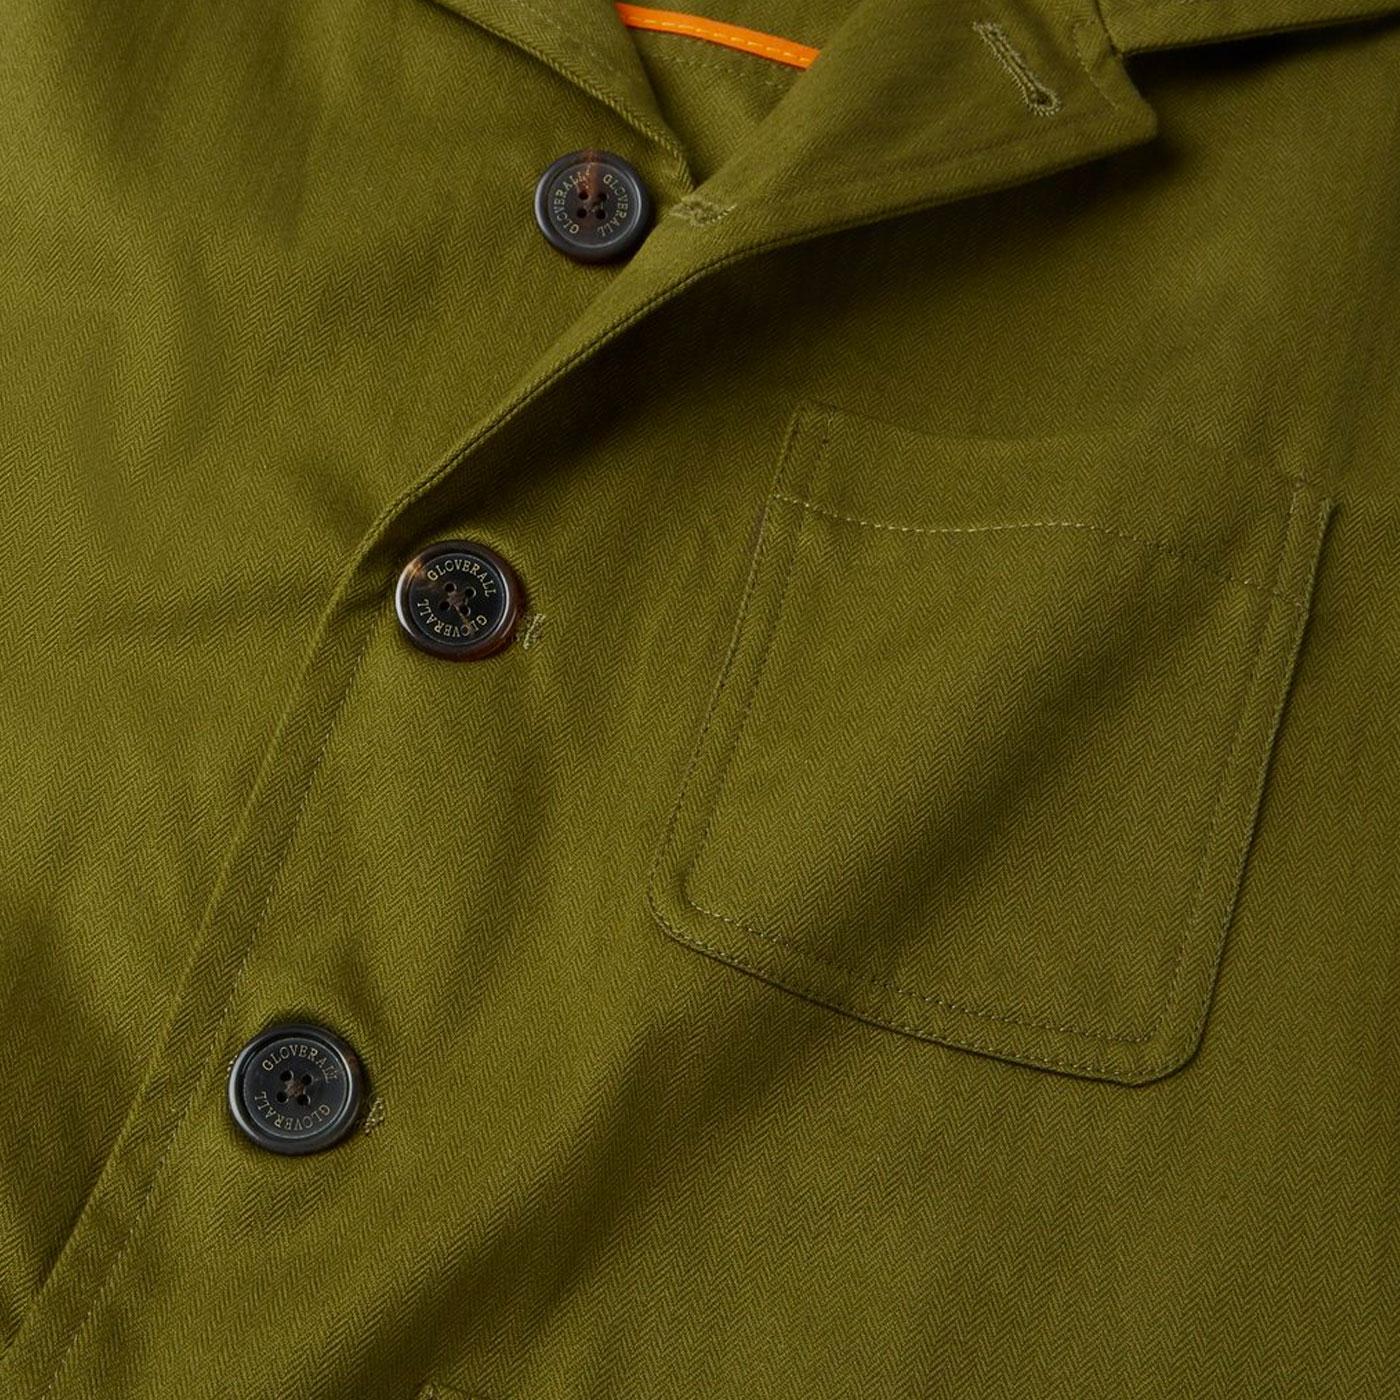 GLOVERALL 'Harry' Retro Made in England Work Jacket in Khaki